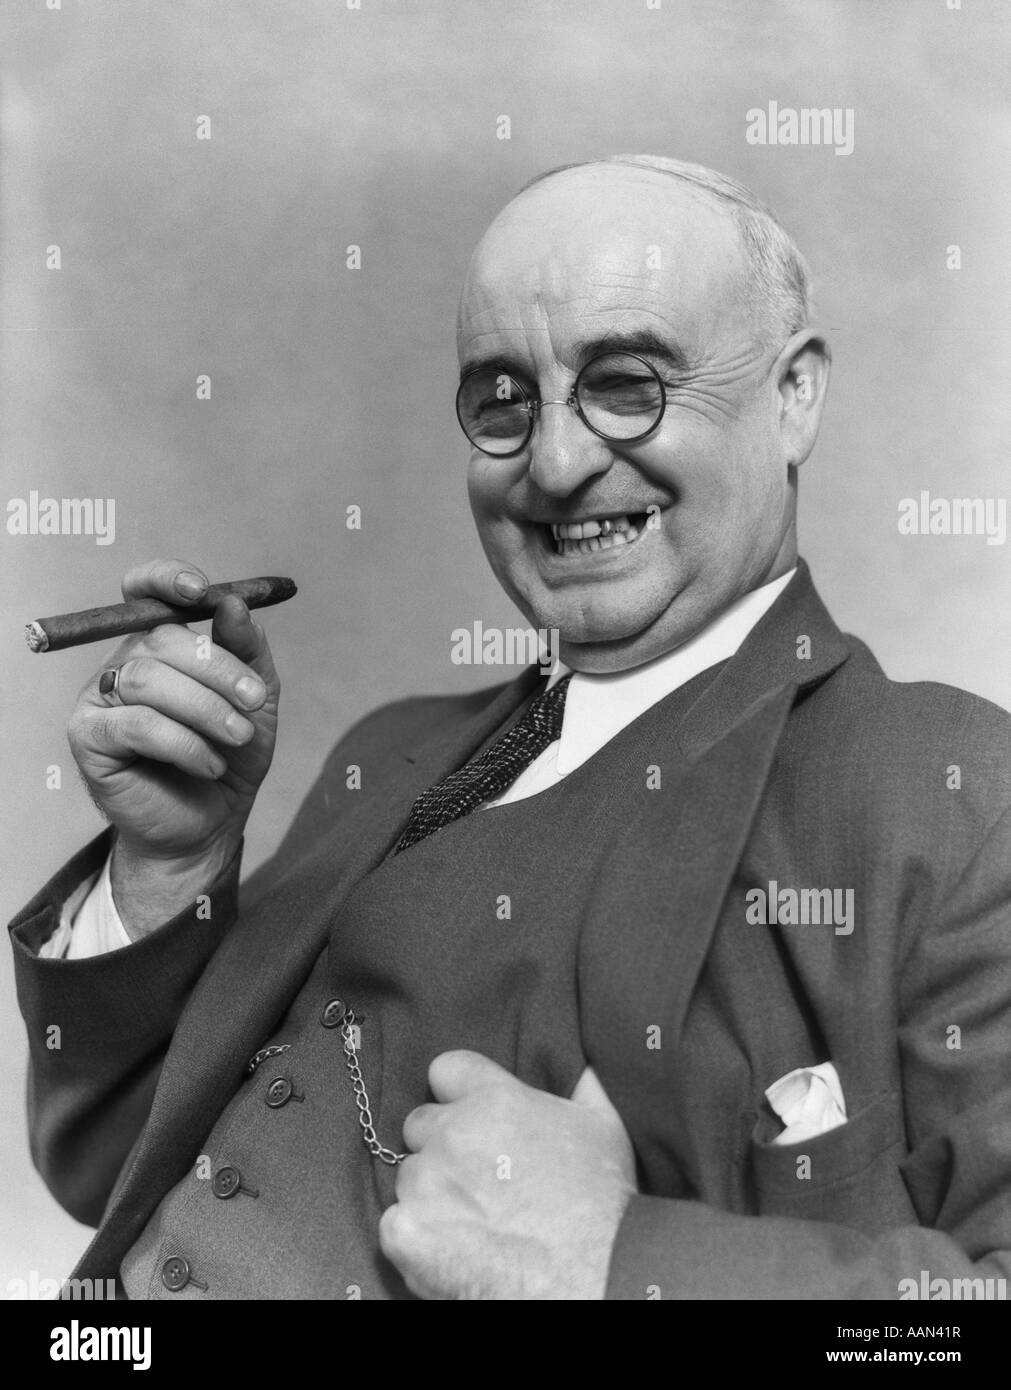 1930s ELDERLY BUSINESSMAN IN 3-PIECE SUIT & GLASSES LEANING BACK SMILING WITH CIGAR IN HAND Stock Photo